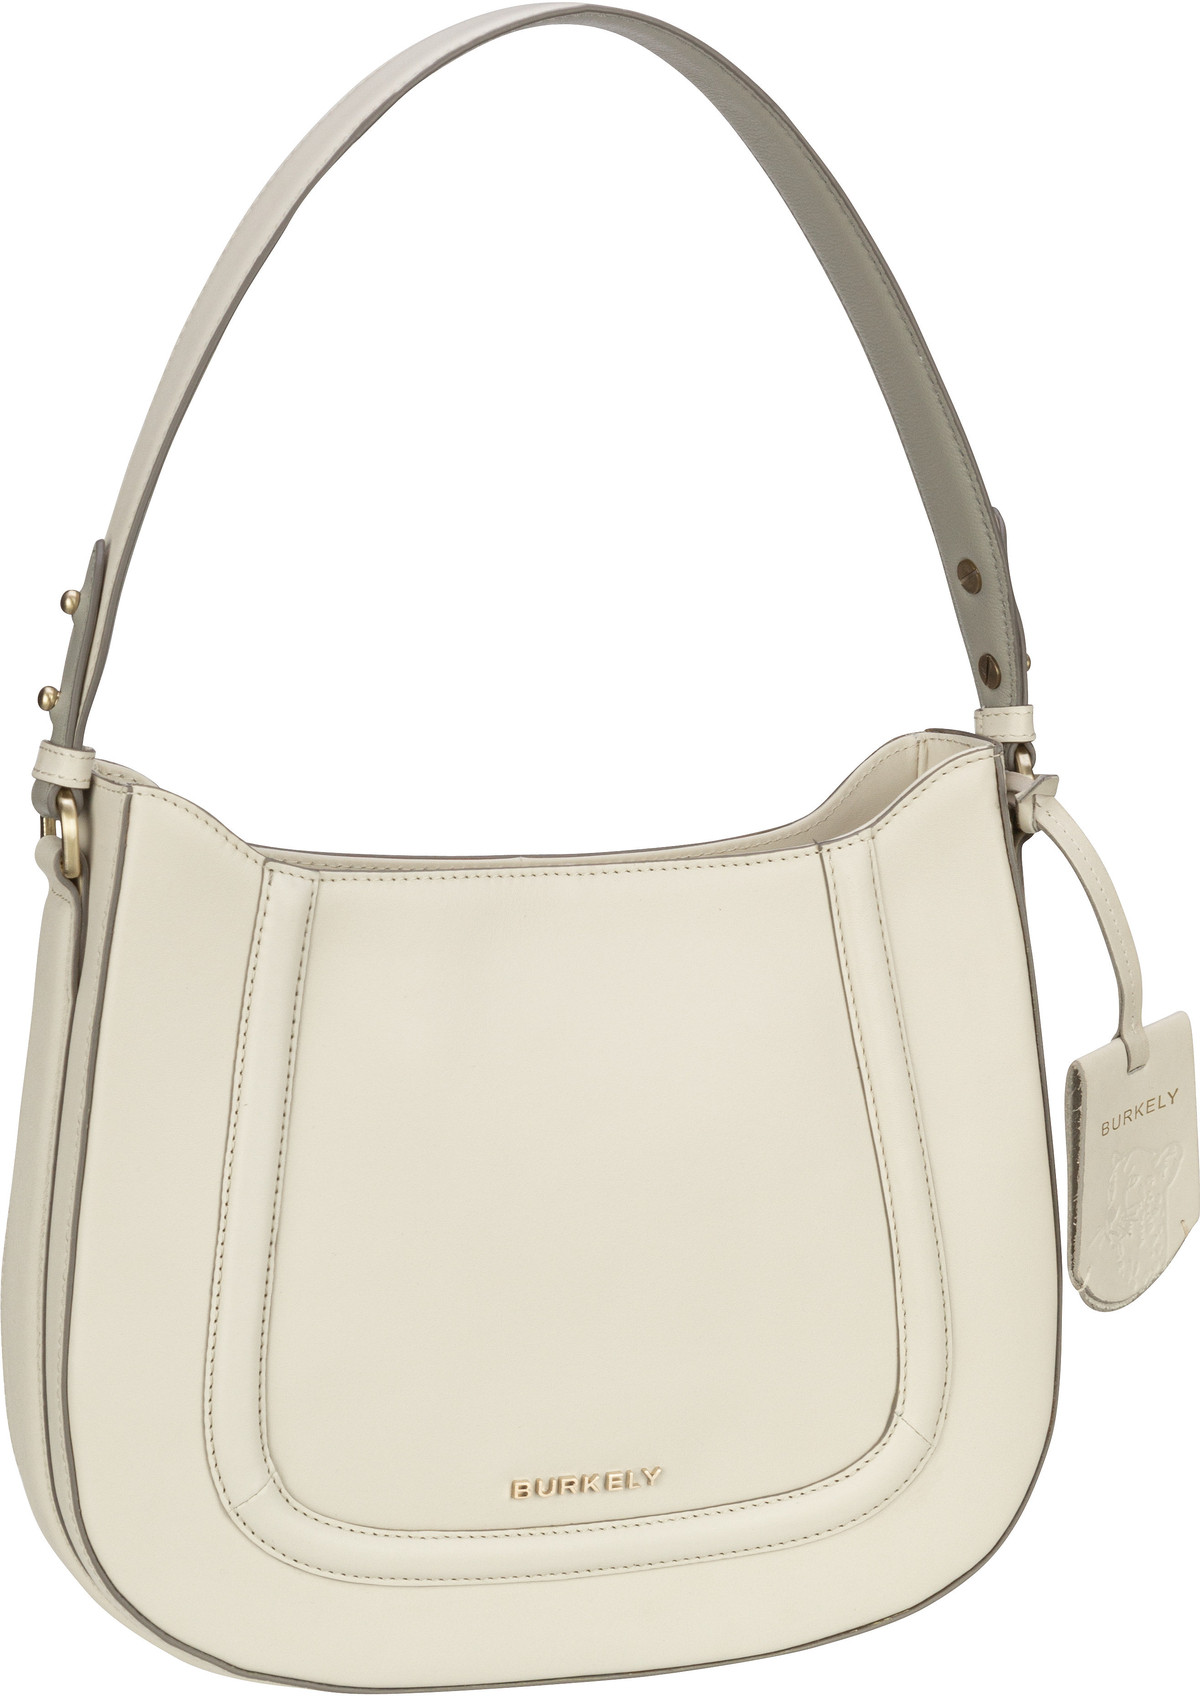 Burkely Beloved Bailey Hobo - Off White